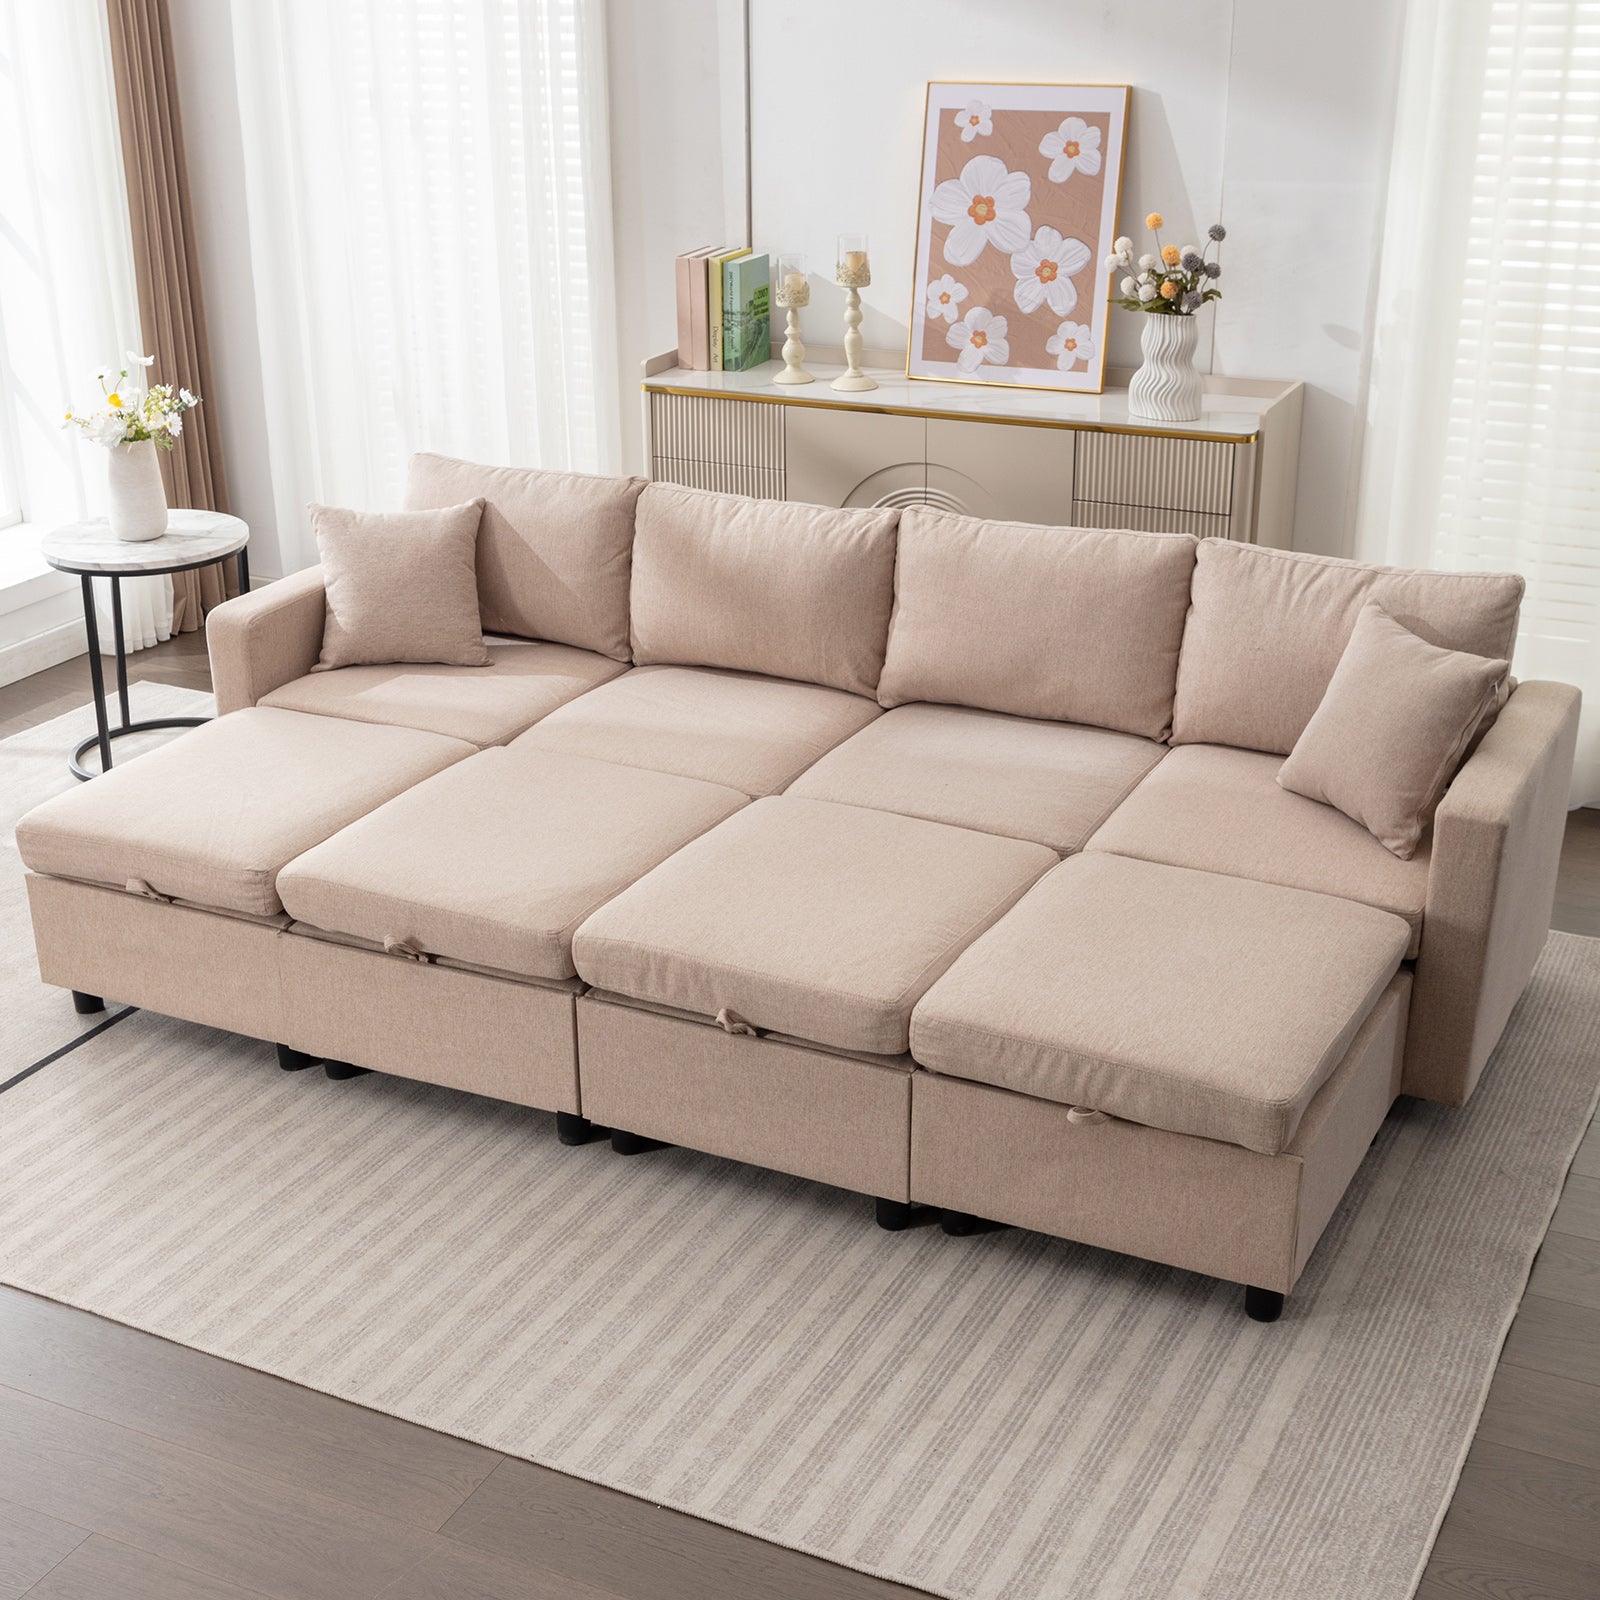 Cecer Sectional Sofa Couch for Living Room, Modern Seat Couches/ Storage Space/Memory Foam Cushions/Linen Fabric/Soft Sponge Seaters/Easy Assembly